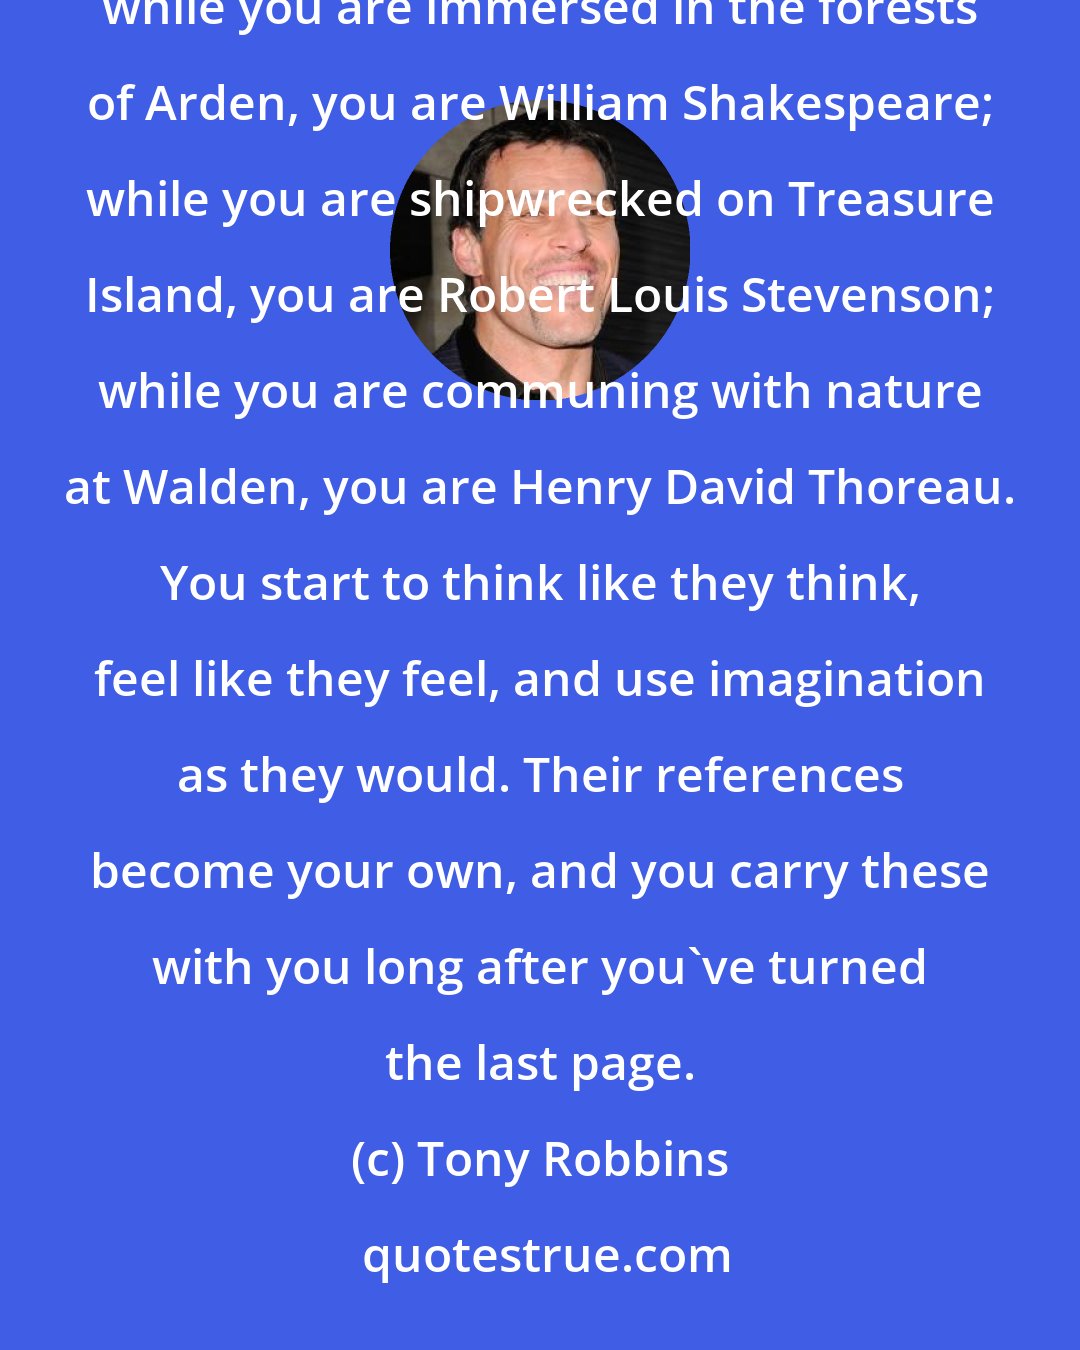 Tony Robbins: The power of reading a great book is that you start thinking like the author. For those magical moments while you are immersed in the forests of Arden, you are William Shakespeare; while you are shipwrecked on Treasure Island, you are Robert Louis Stevenson; while you are communing with nature at Walden, you are Henry David Thoreau. You start to think like they think, feel like they feel, and use imagination as they would. Their references become your own, and you carry these with you long after you've turned the last page.